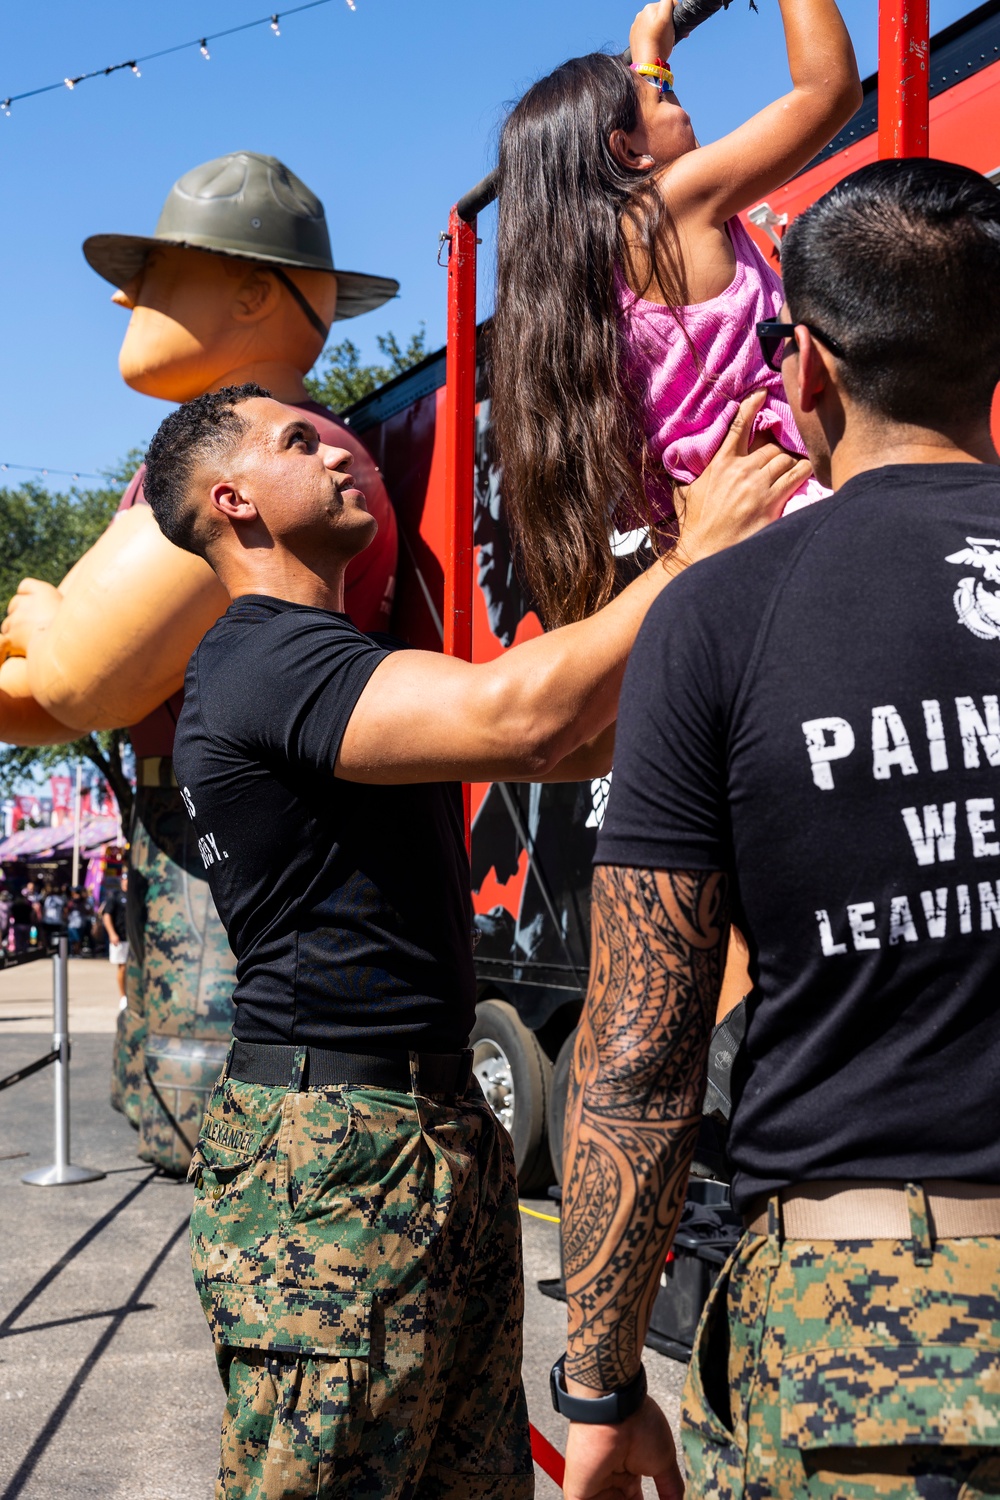 U.S. Marines Land at the State Fair of Texas